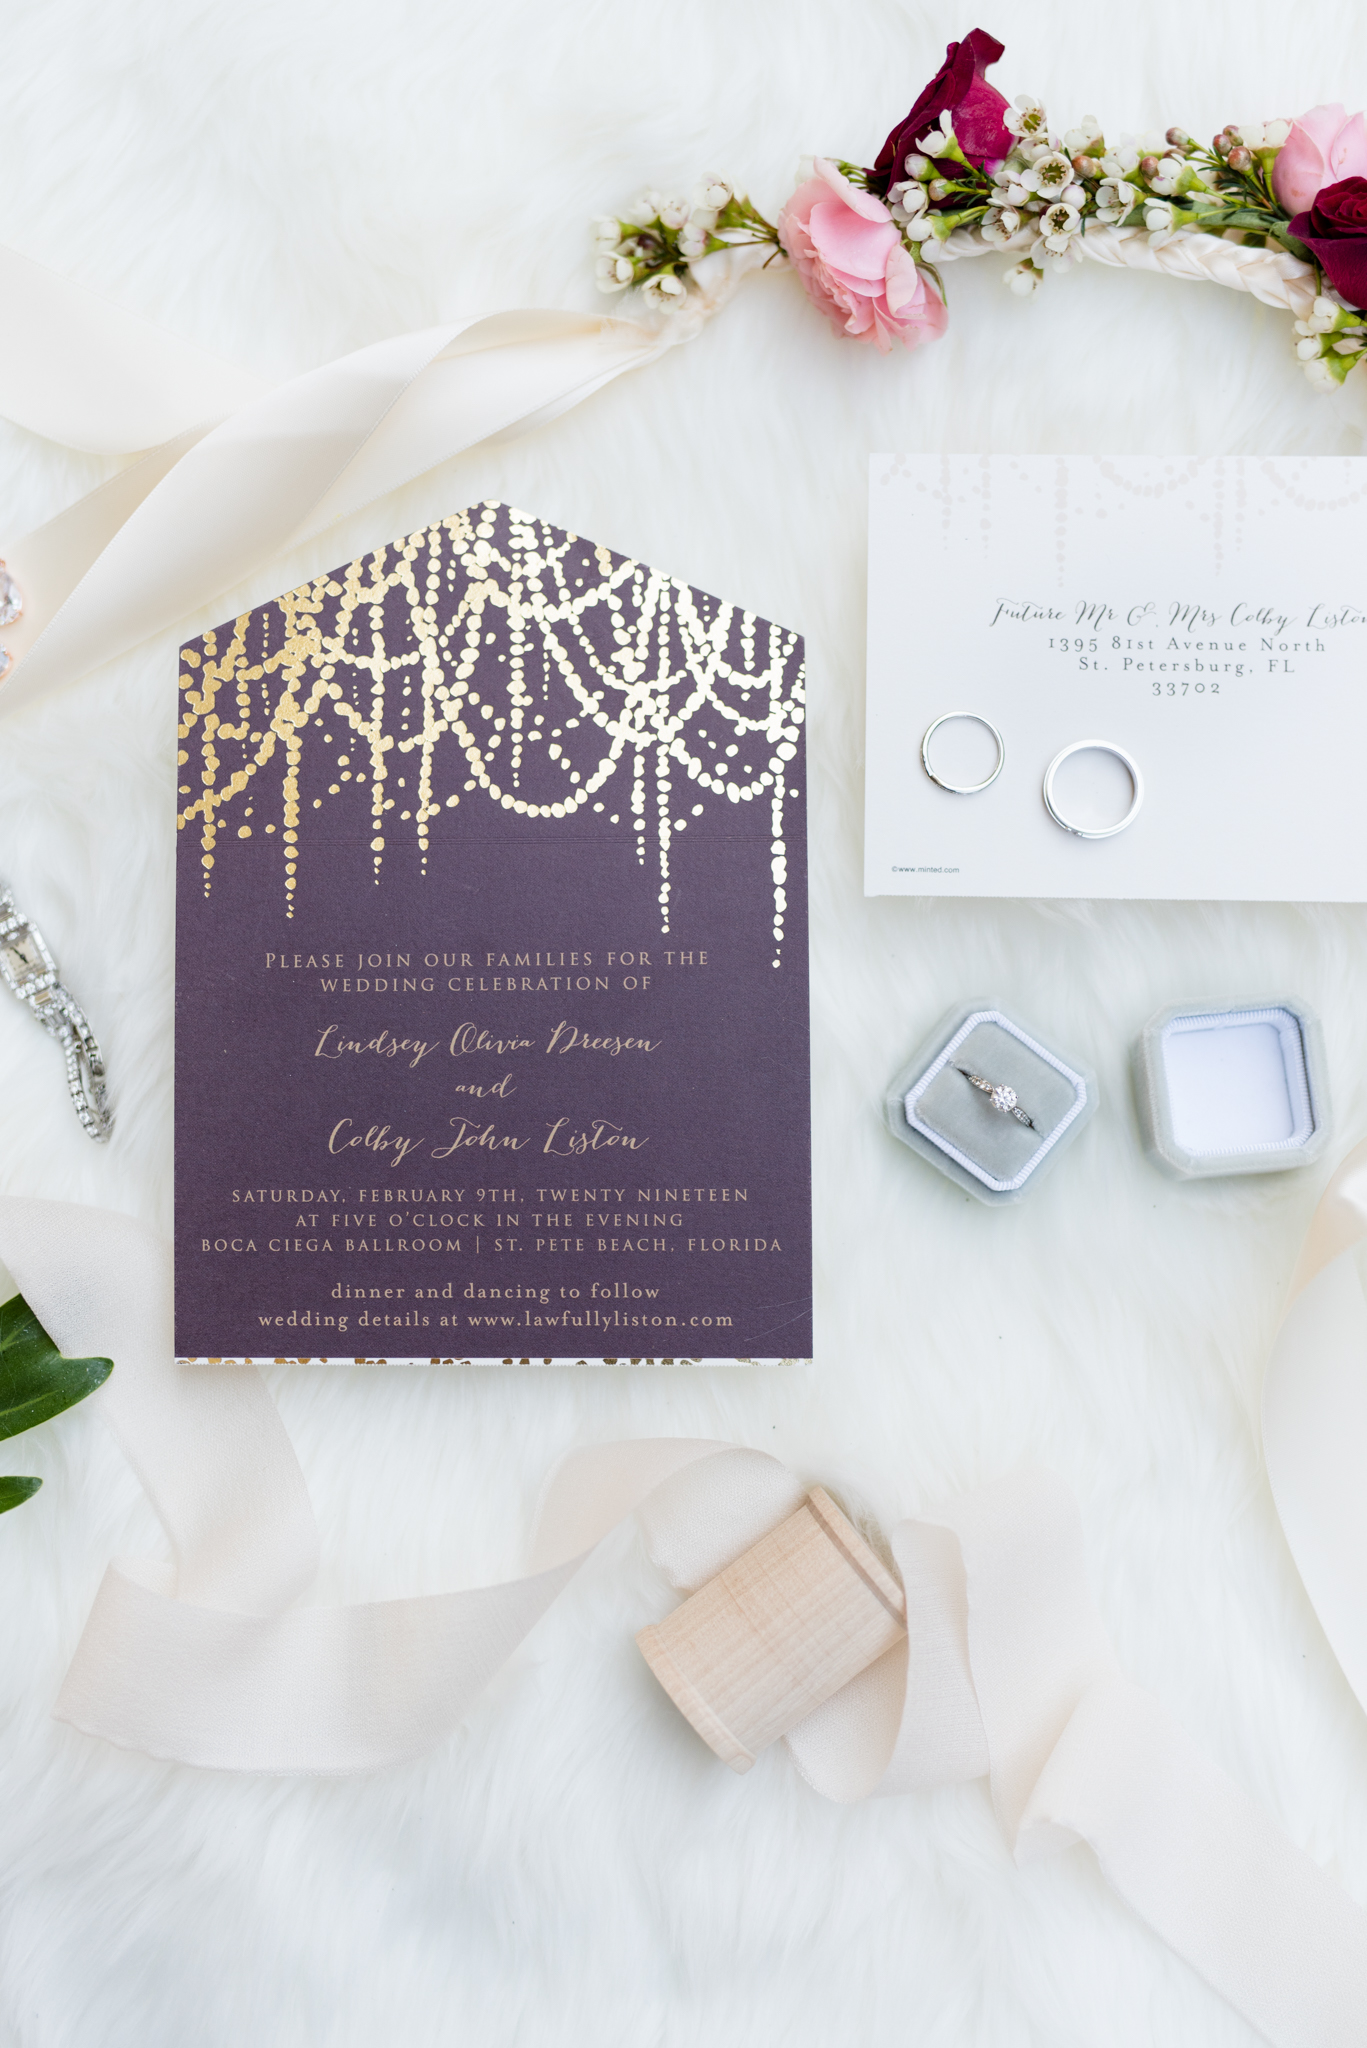 Wedding invitations sit with details.